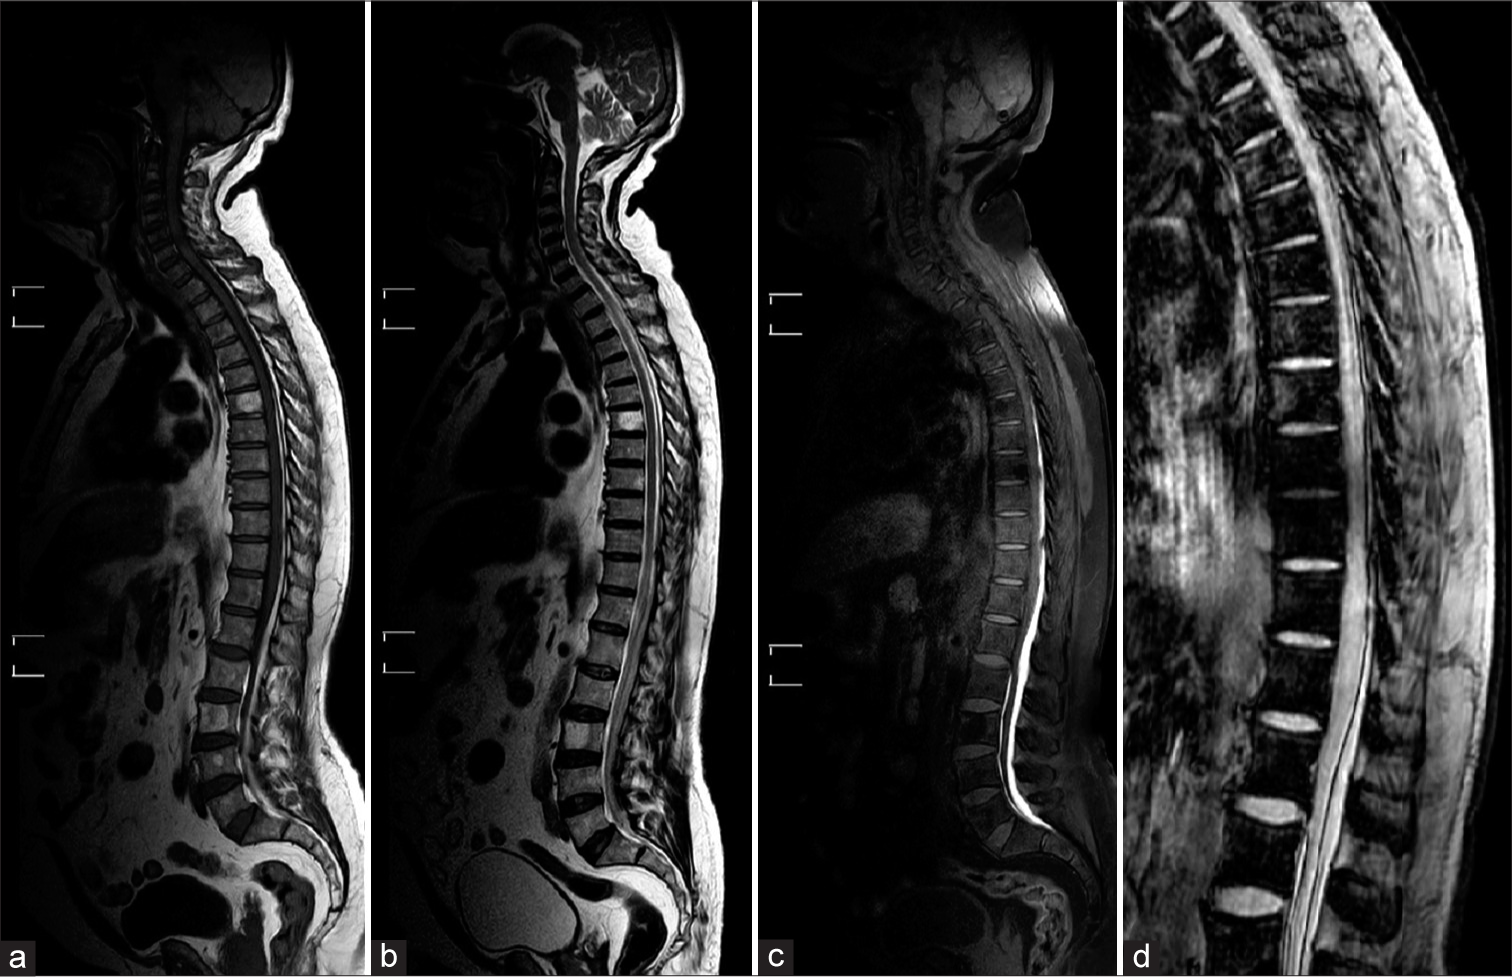 T1-weighted (a) and T2-weighted (b) sagittal sections of whole spine show long segment extra-axial hyperintensity extending from D6 to L5 vertebral levels. T1 FAT-SAT (c) sagittal section of whole spine shows no demonstrable signal suppression. T2 gradient (d) sagittal section shows peripheral hypointense hemosiderin rim.